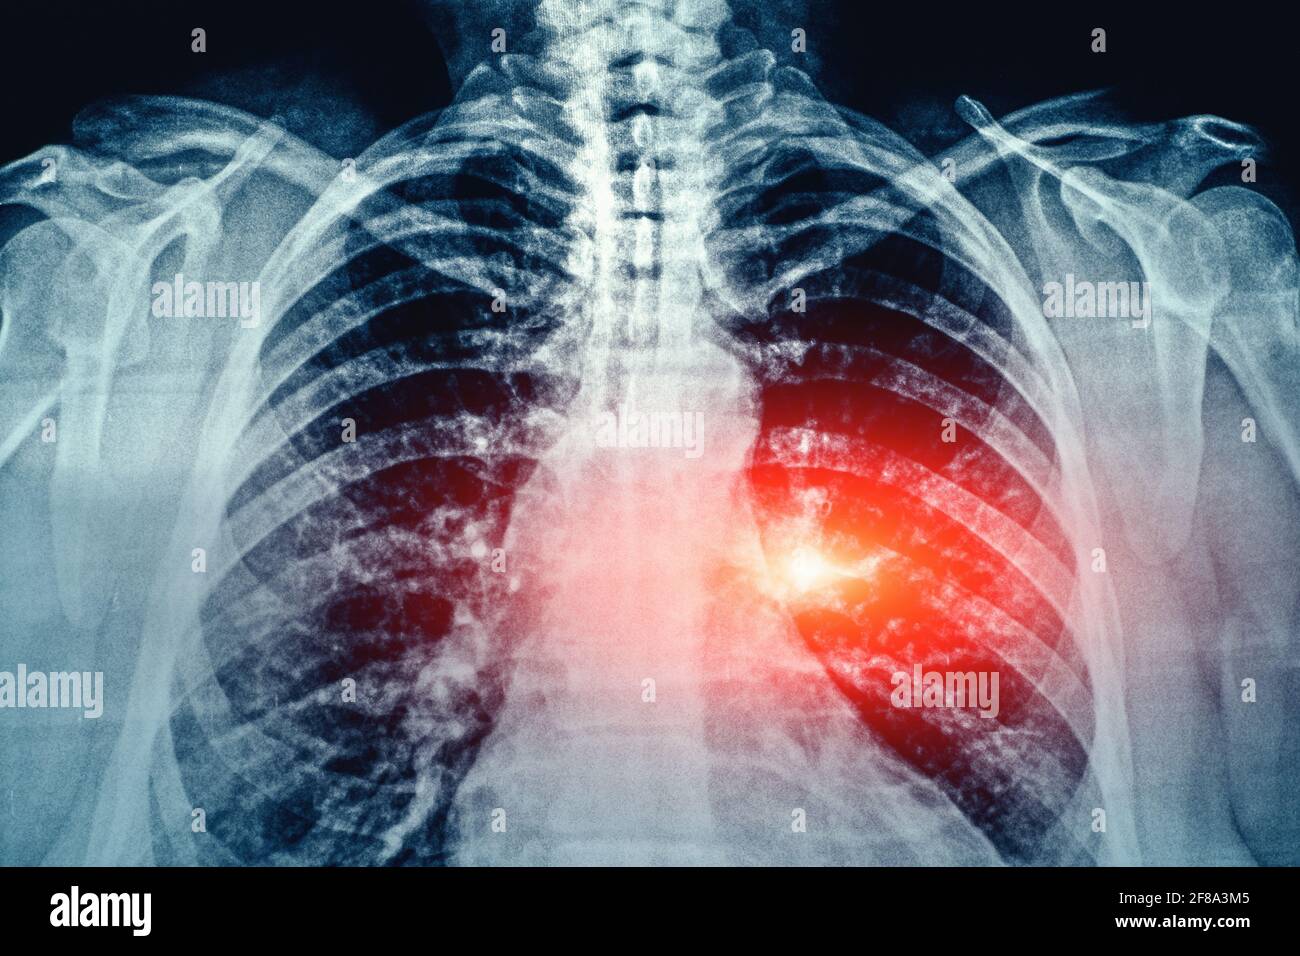 X-Ray film with grain Image of Human Chest and Lungs medical diagnosis with red area as symbol of point of pain and illness. Stock Photo